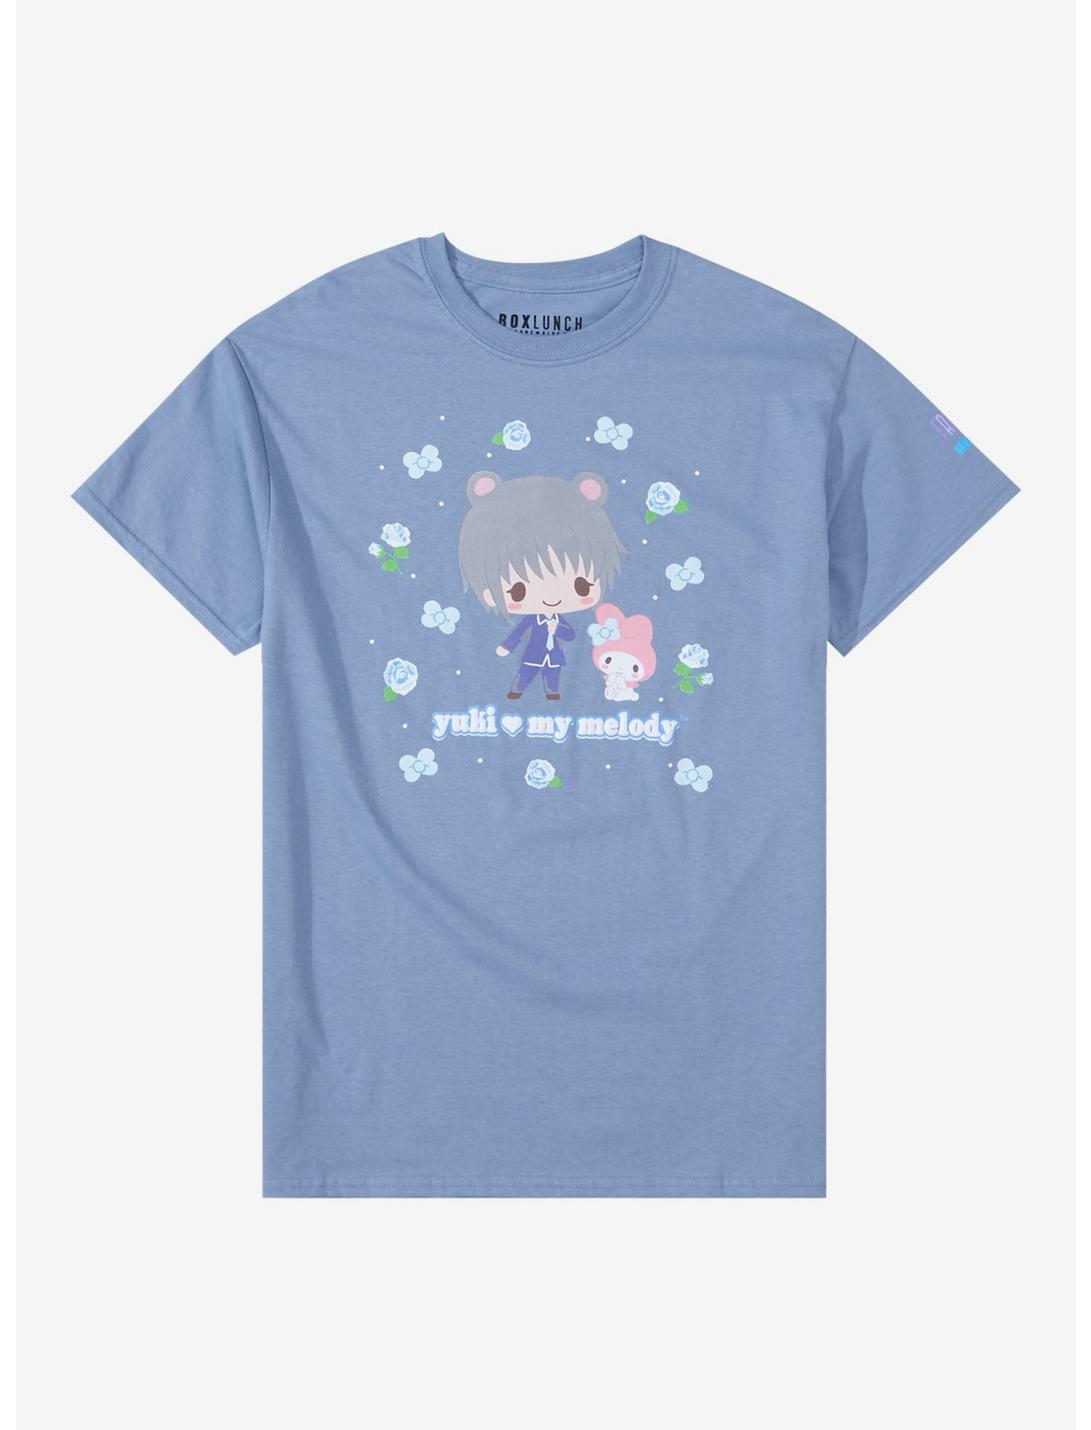 Fruits Basket x Hello Kitty and Friends Chibi Yuki Sohma & My Melody T-Shirt - BoxLunch Exclusive , MINT, hi-res